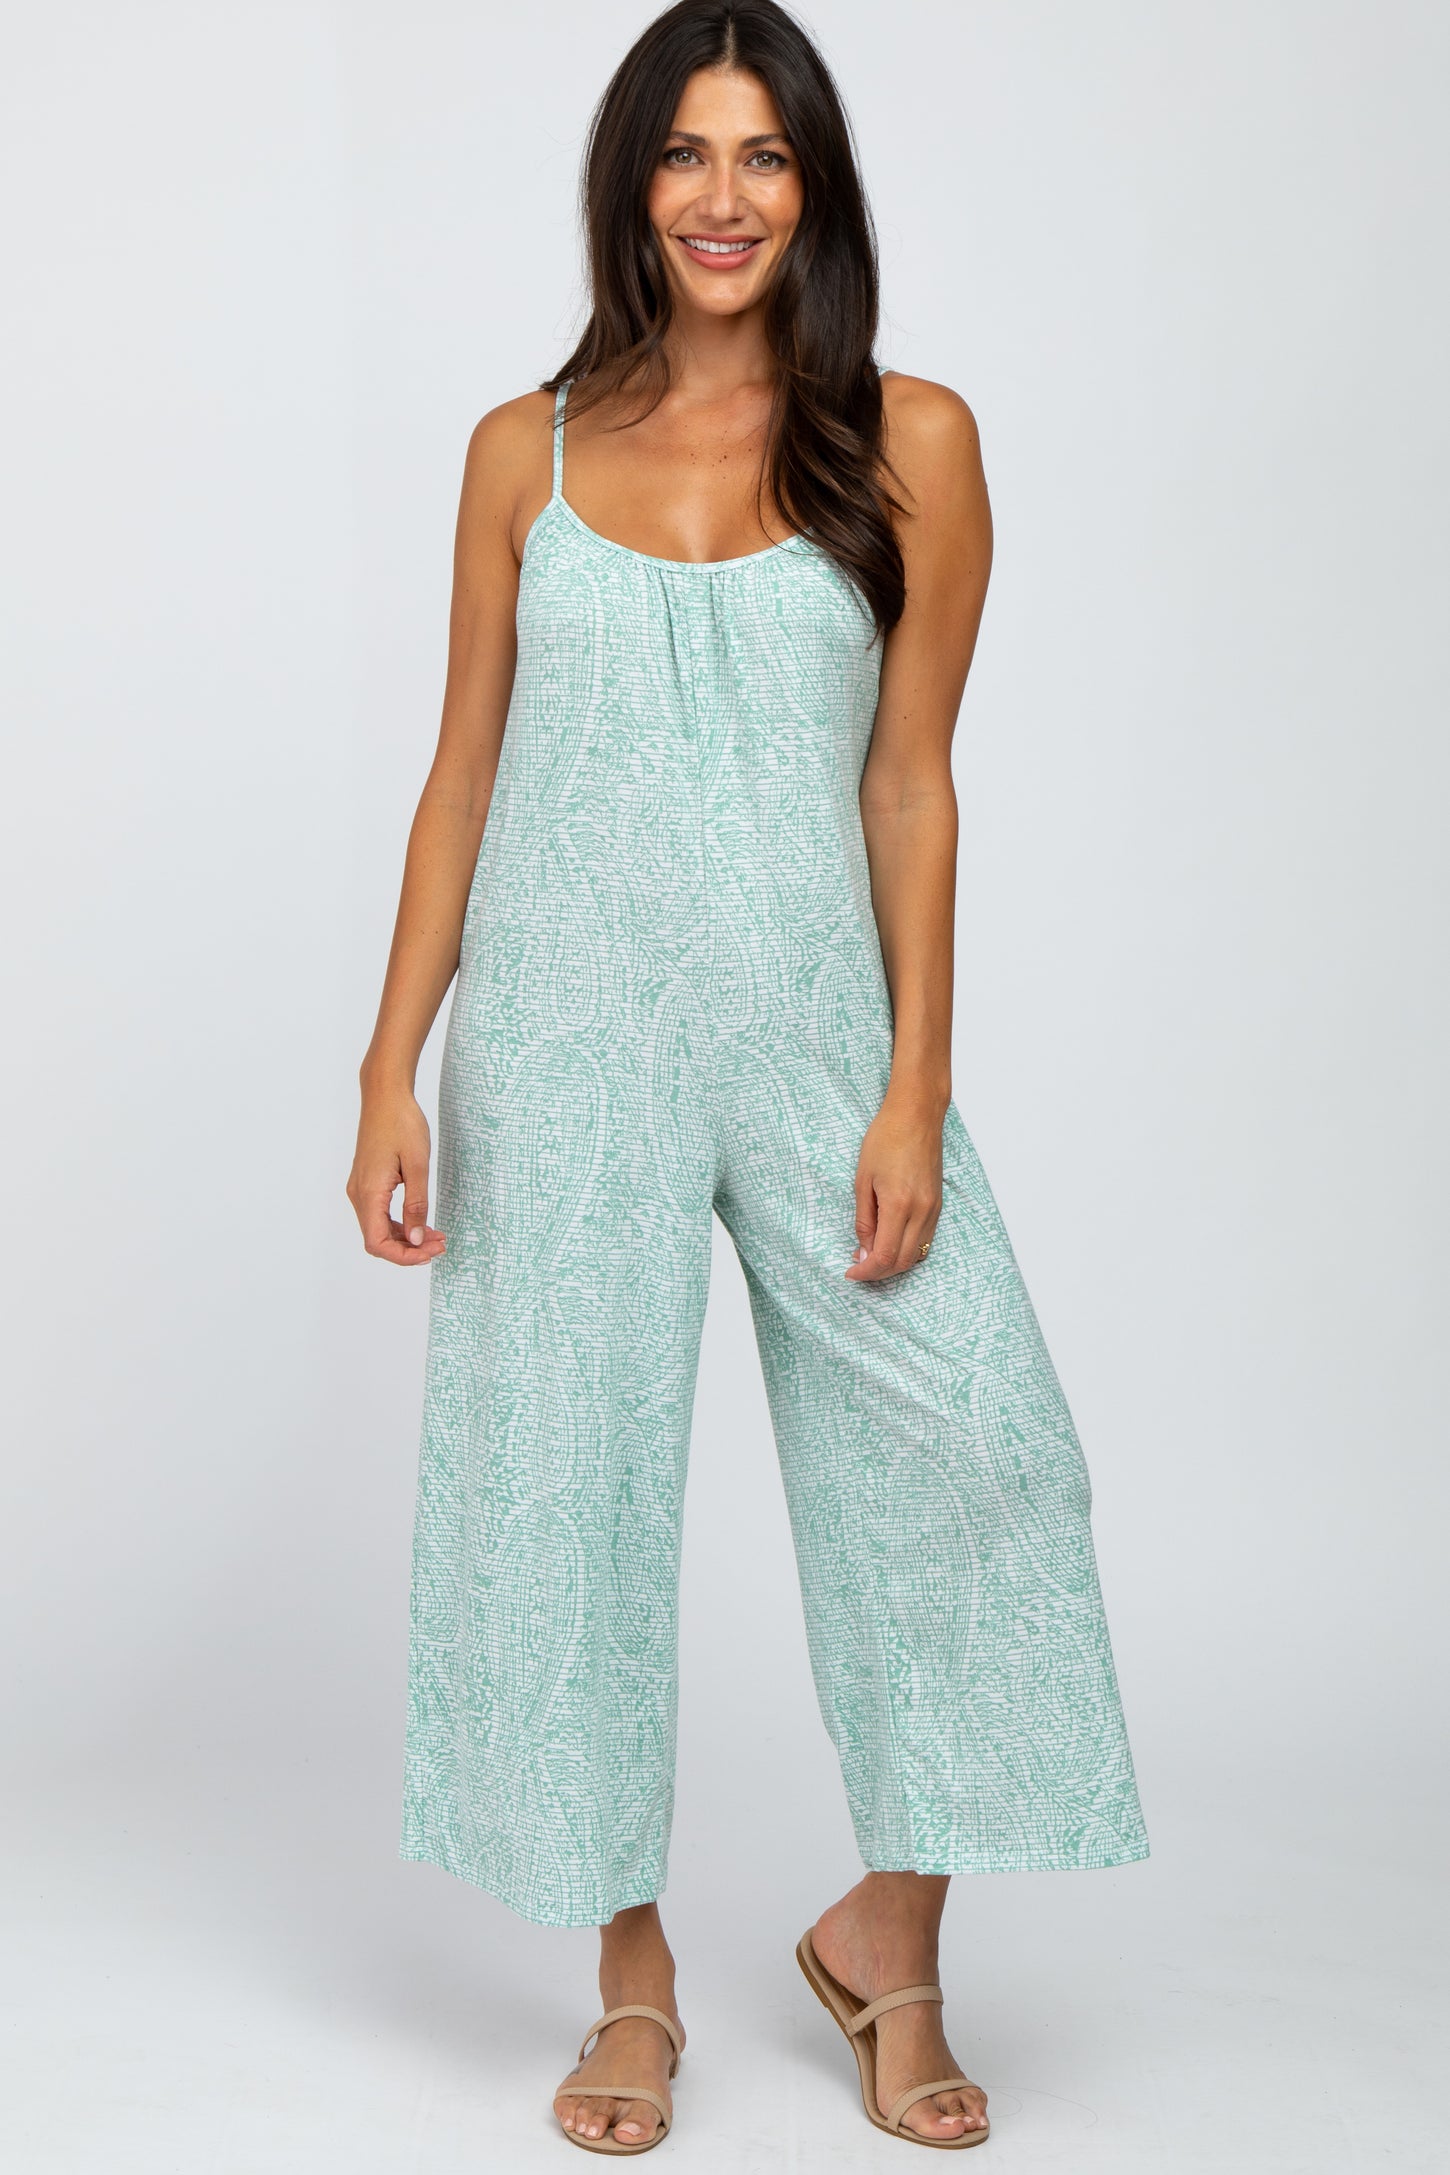 Mint Green Printed Cropped Tie Back Maternity Jumpsuit